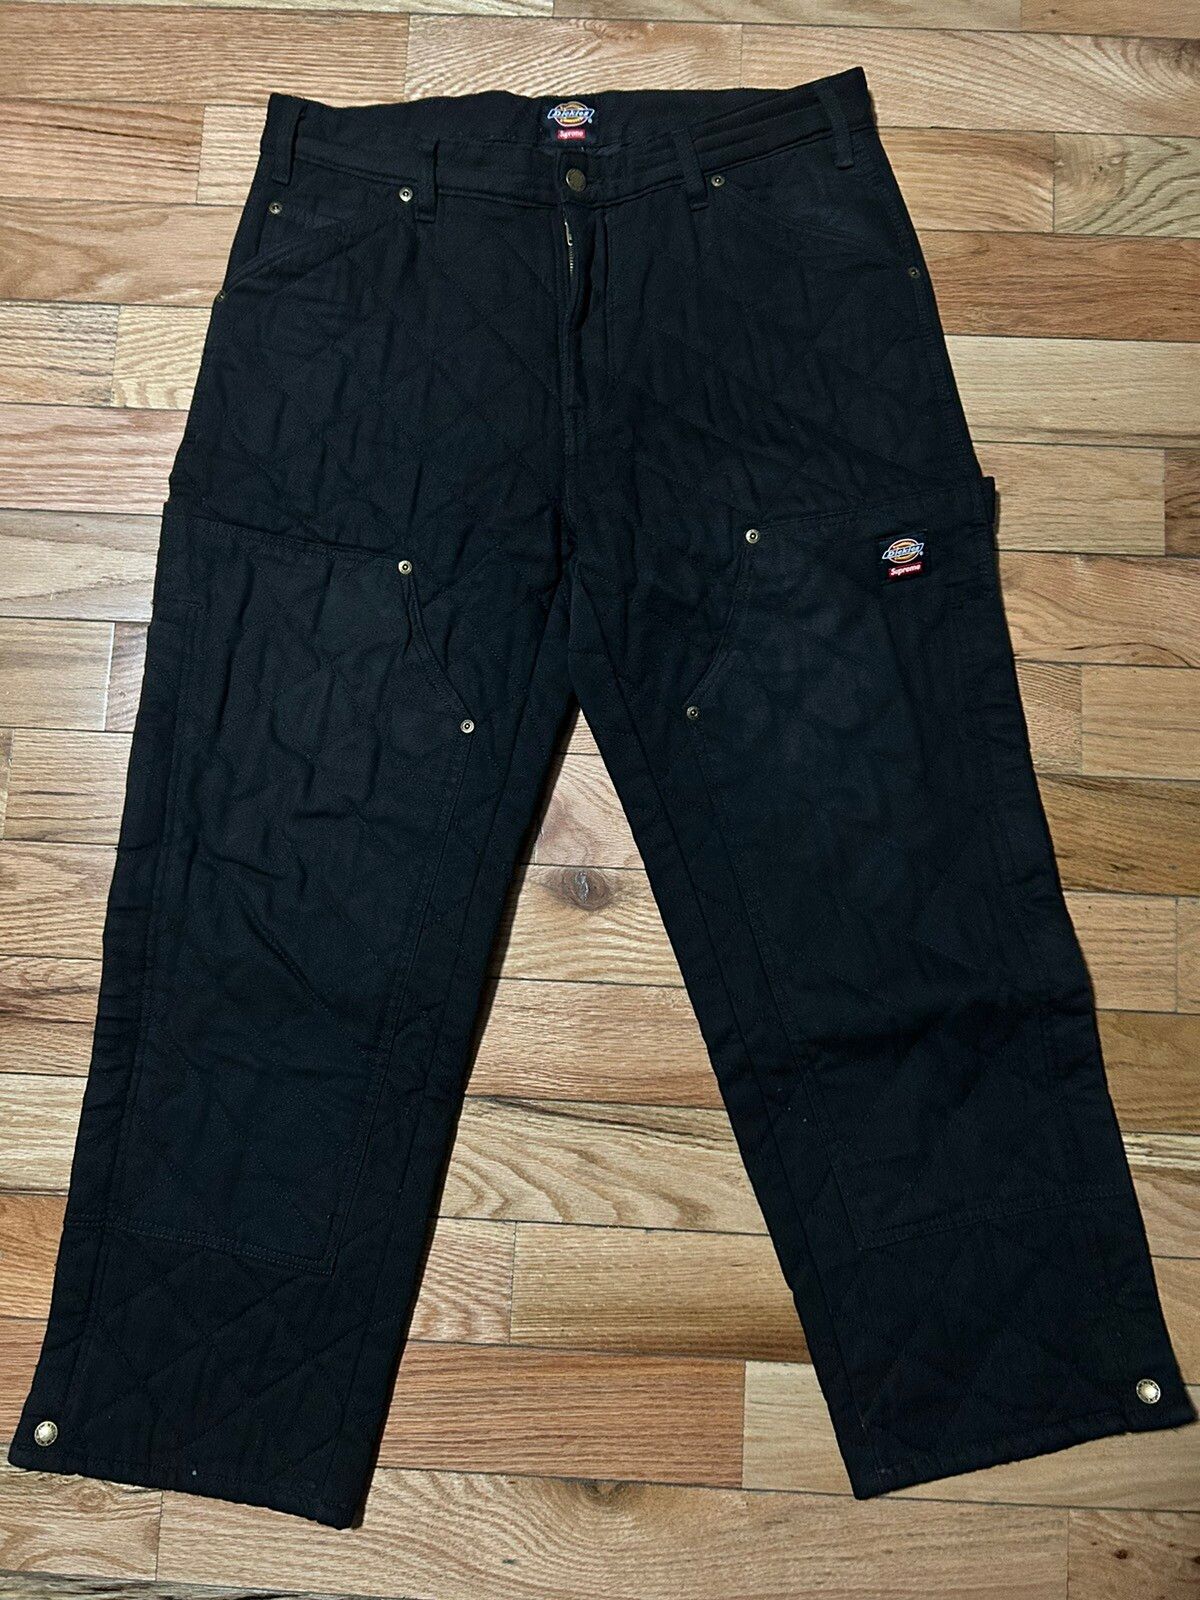 Supreme Dickies quilted double knee Pant